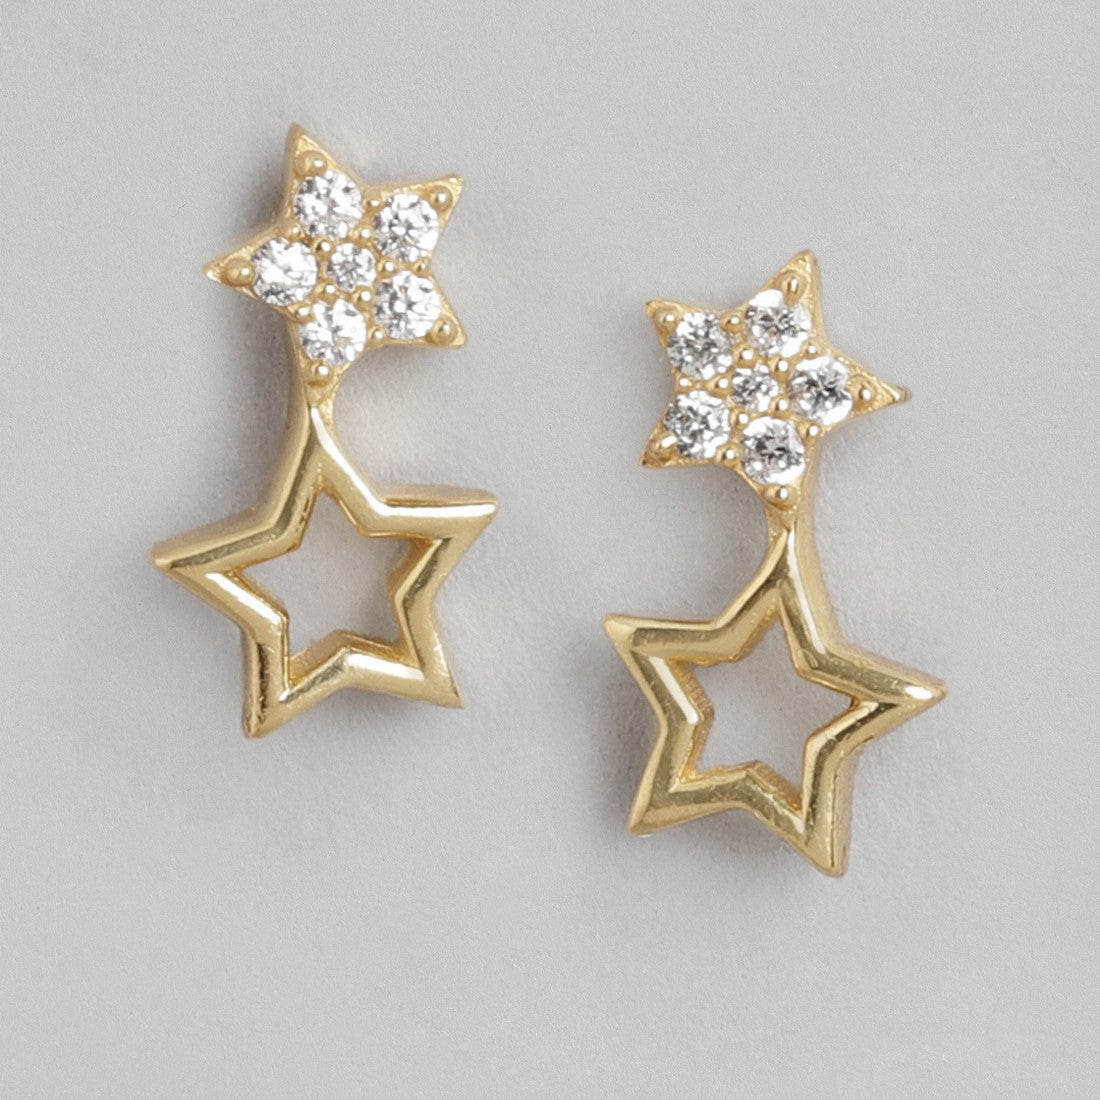 Dual Star CZ Studded 925 Sterling Silver Earring